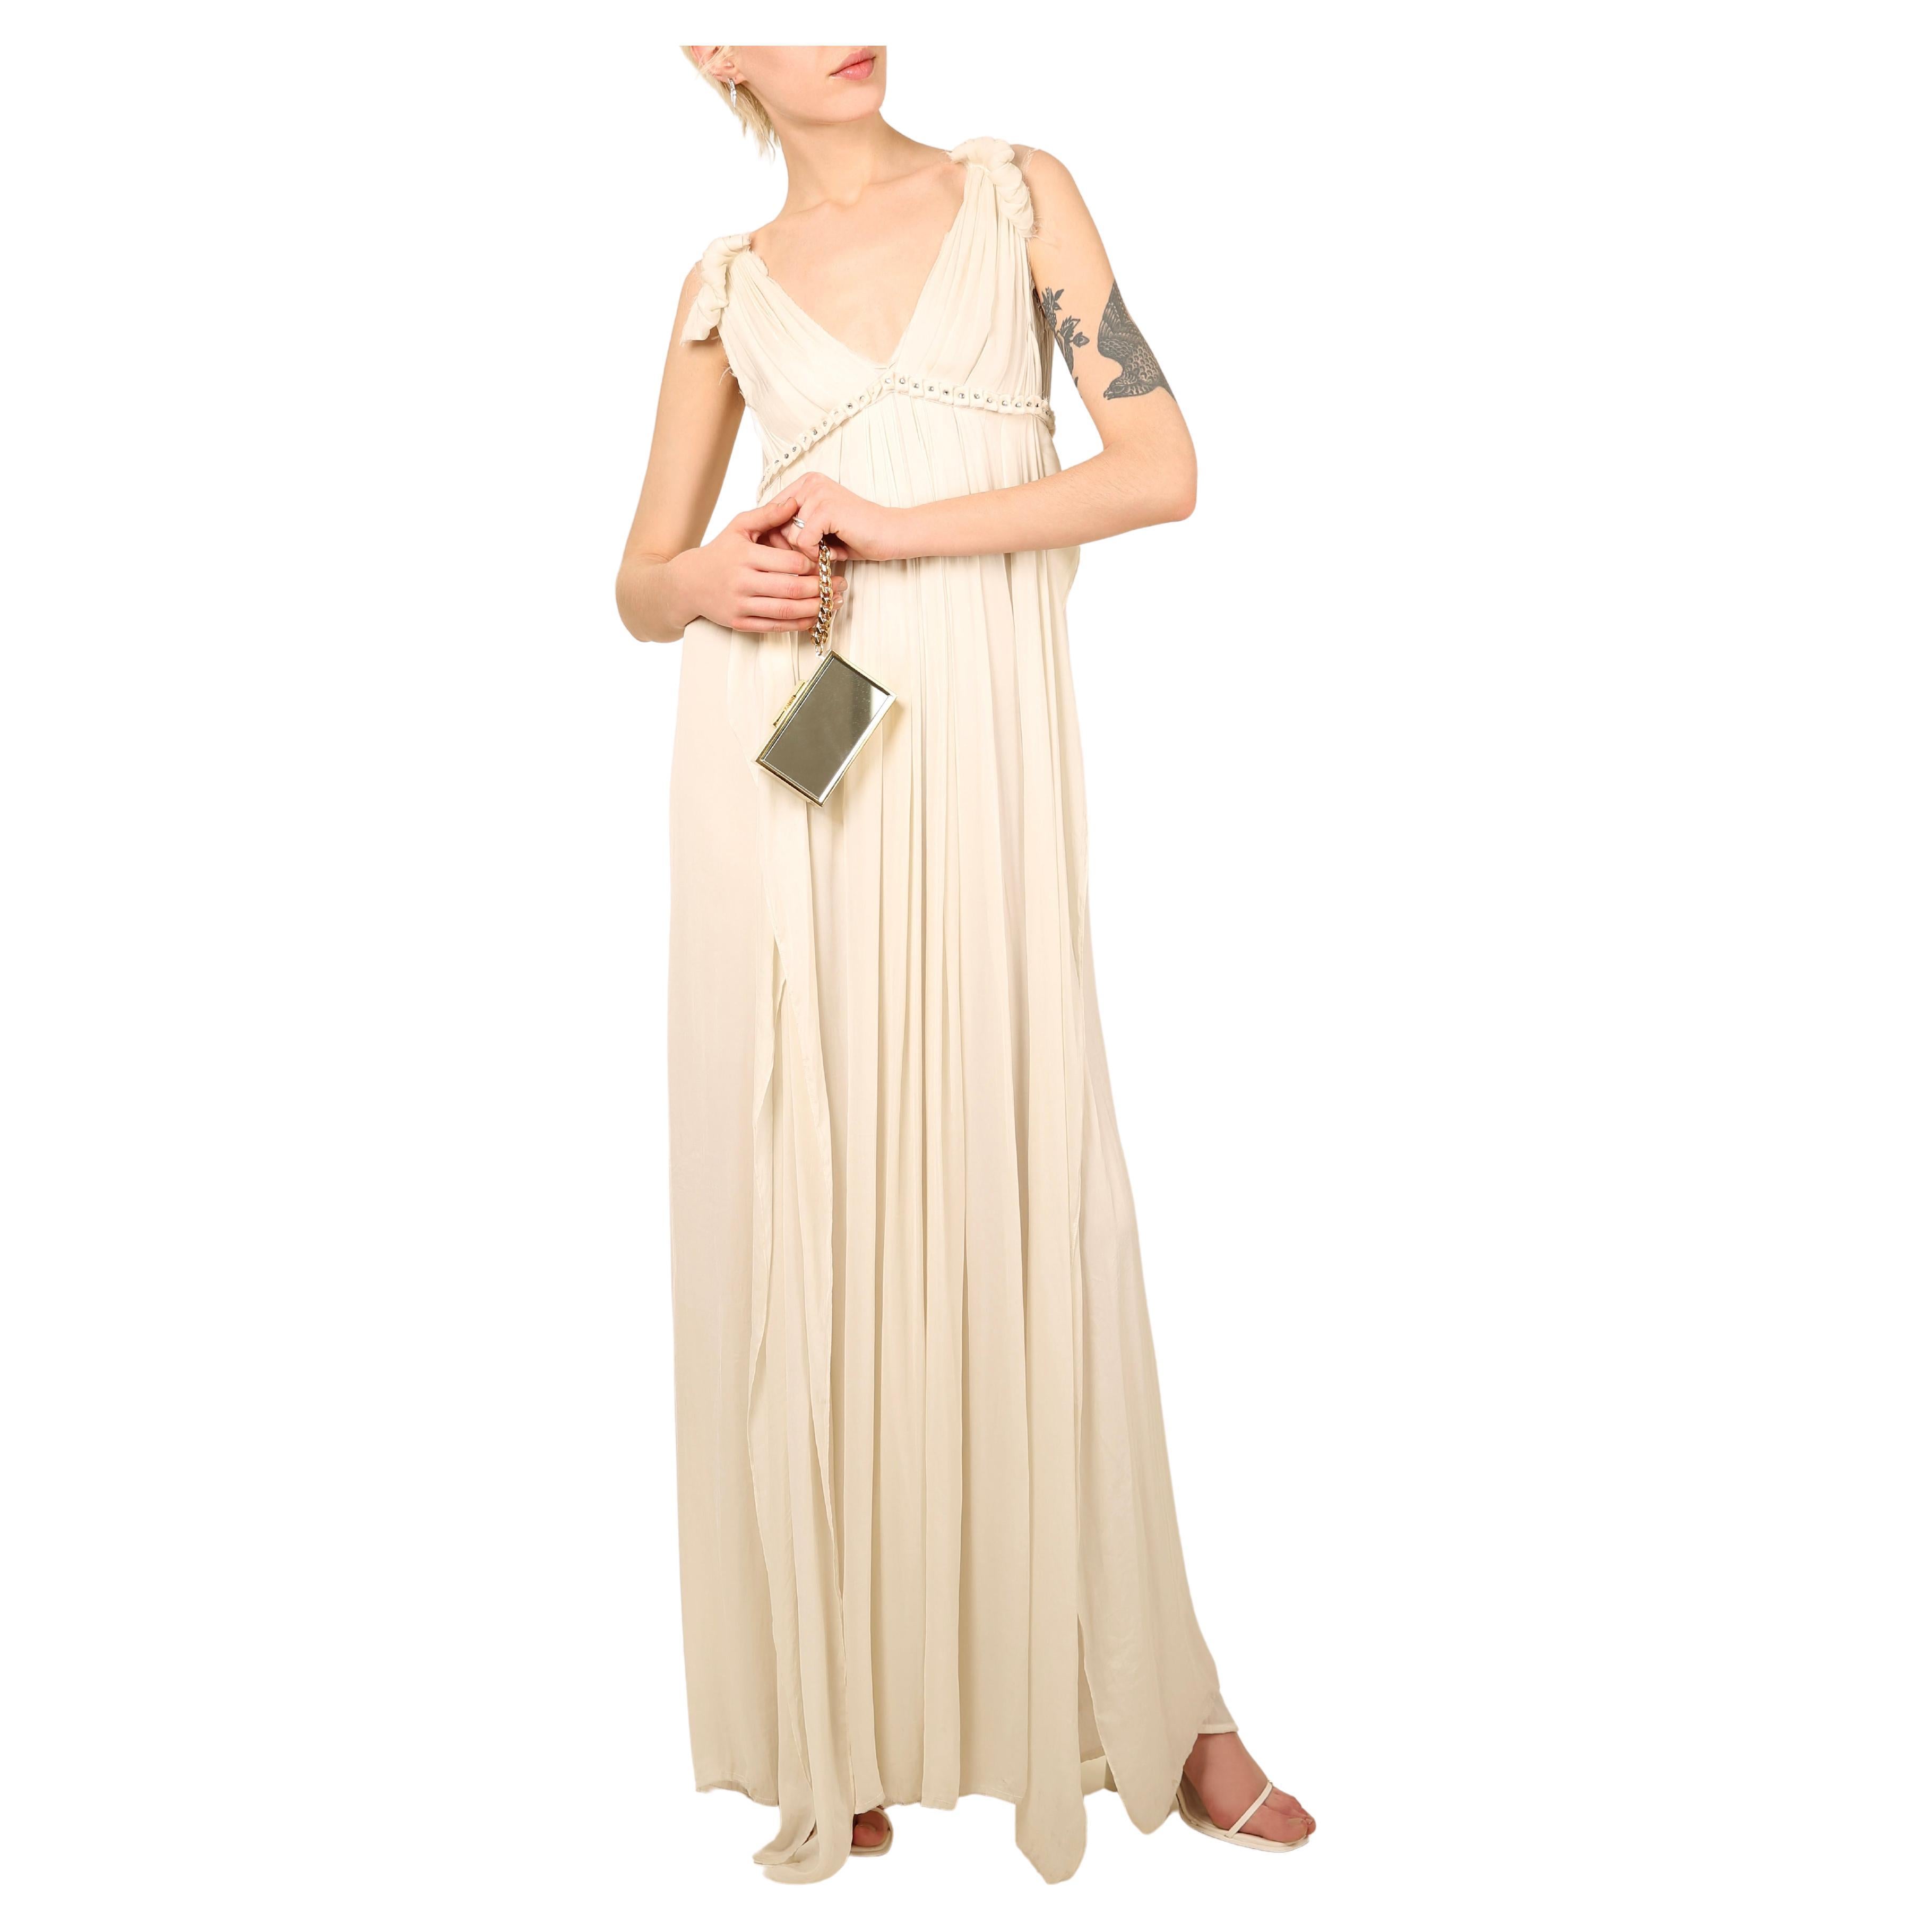 Lanvin white grecian style washed silk crystal embellished wedding dress gown